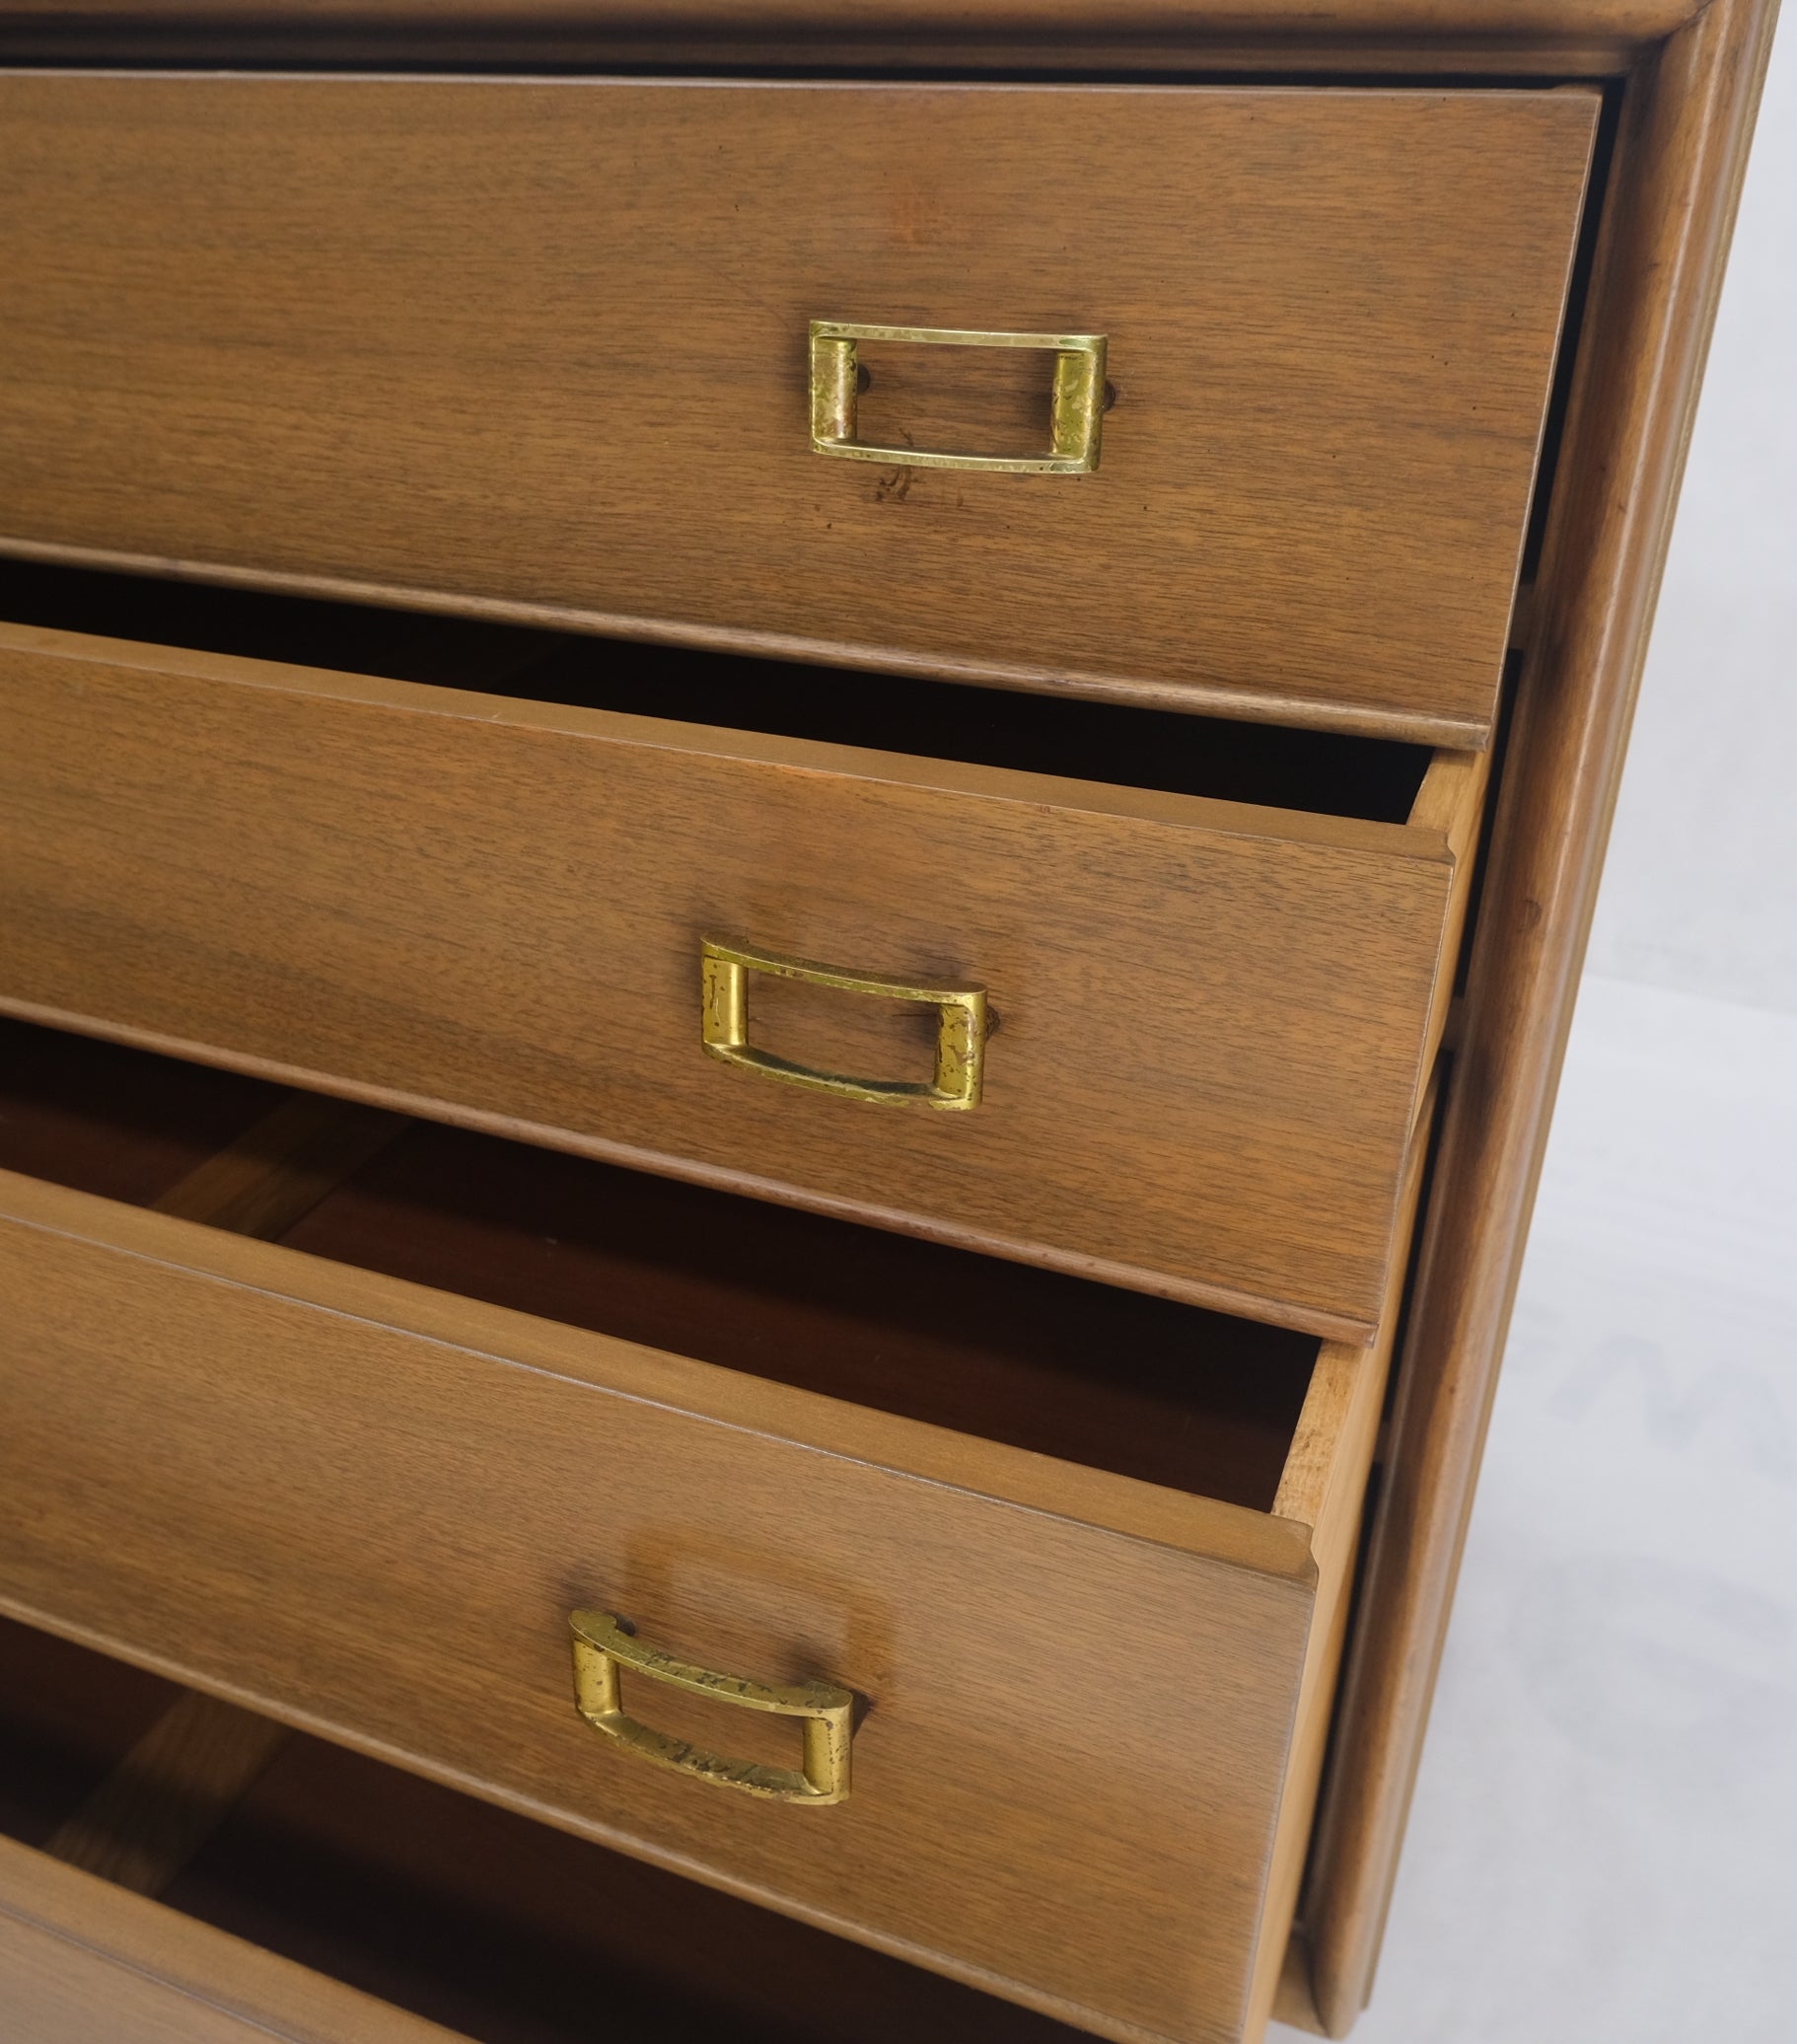 Lacquered Paul Frankl Johnson Furniture Long 8 Drawers Dresser Credenza Buckle Brass Pulls